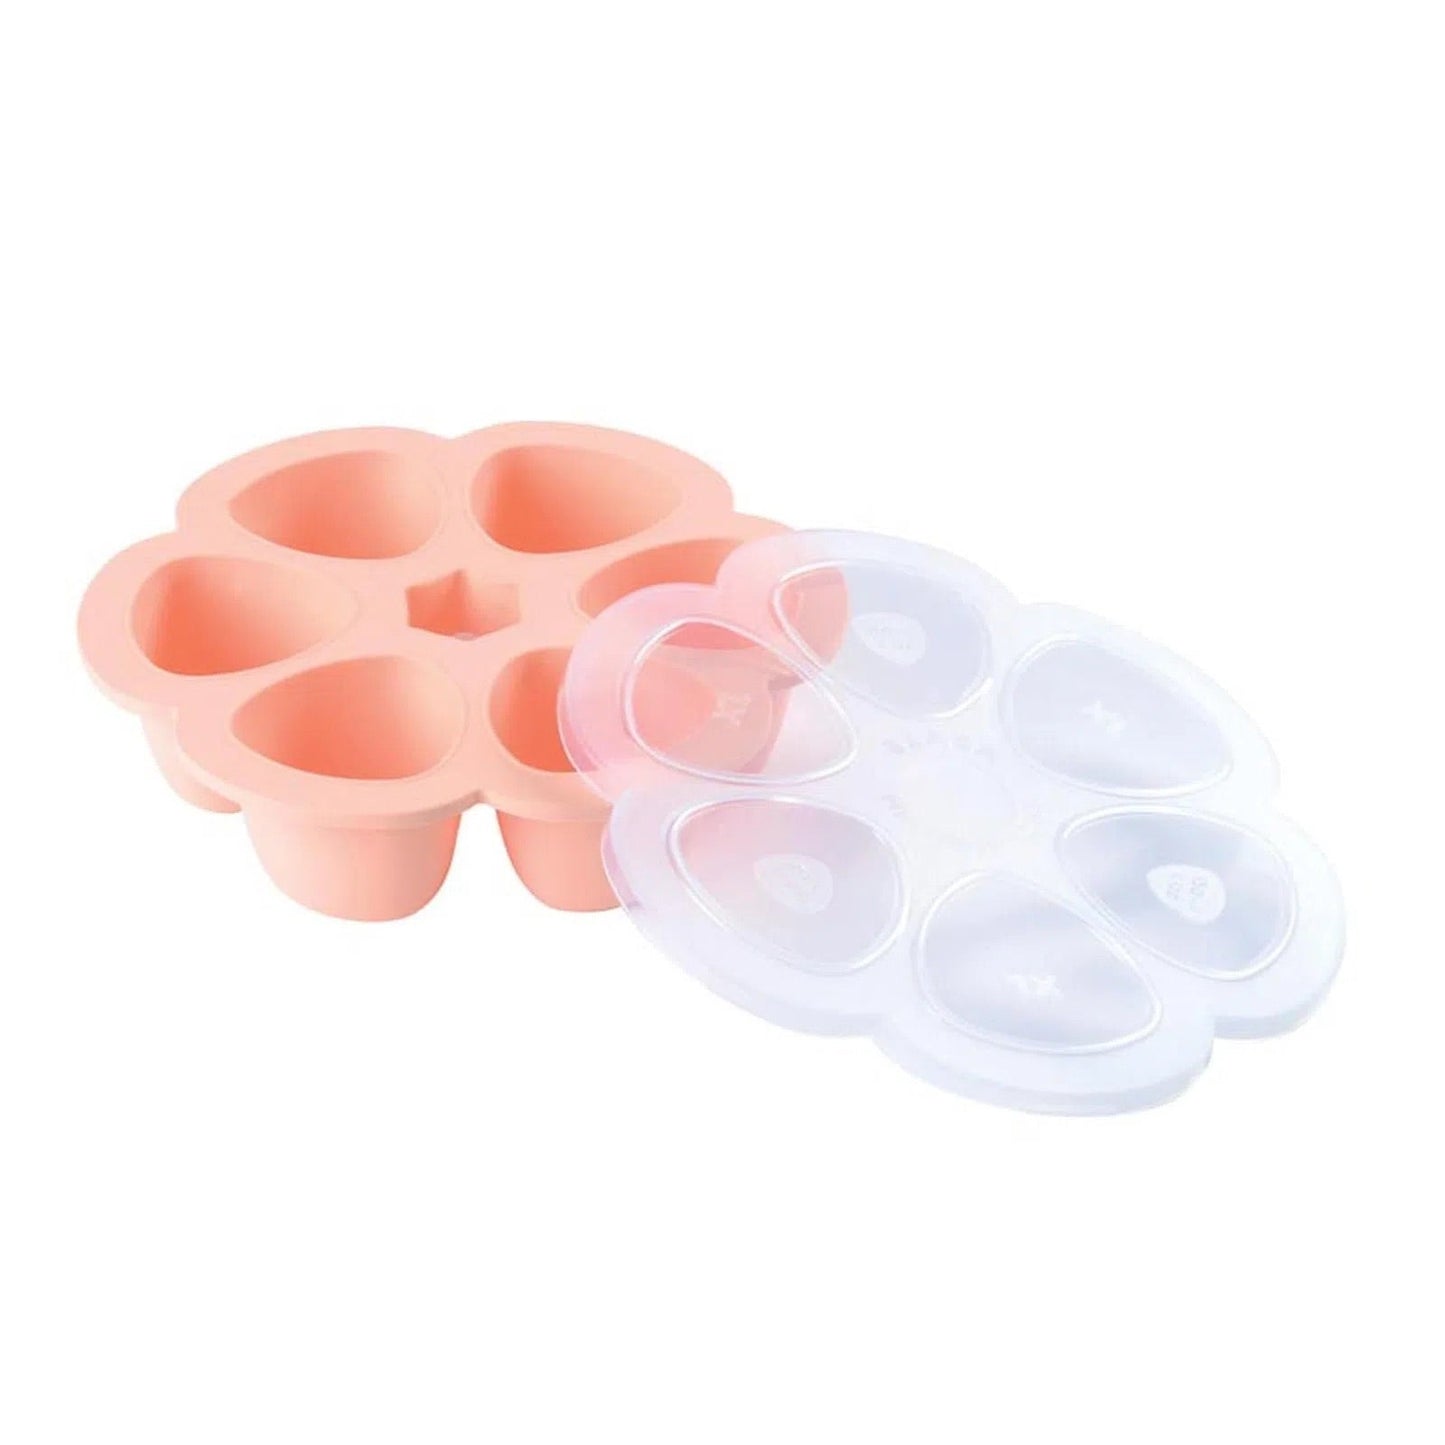 Multiportions 90ml Silicone Tray - Pink